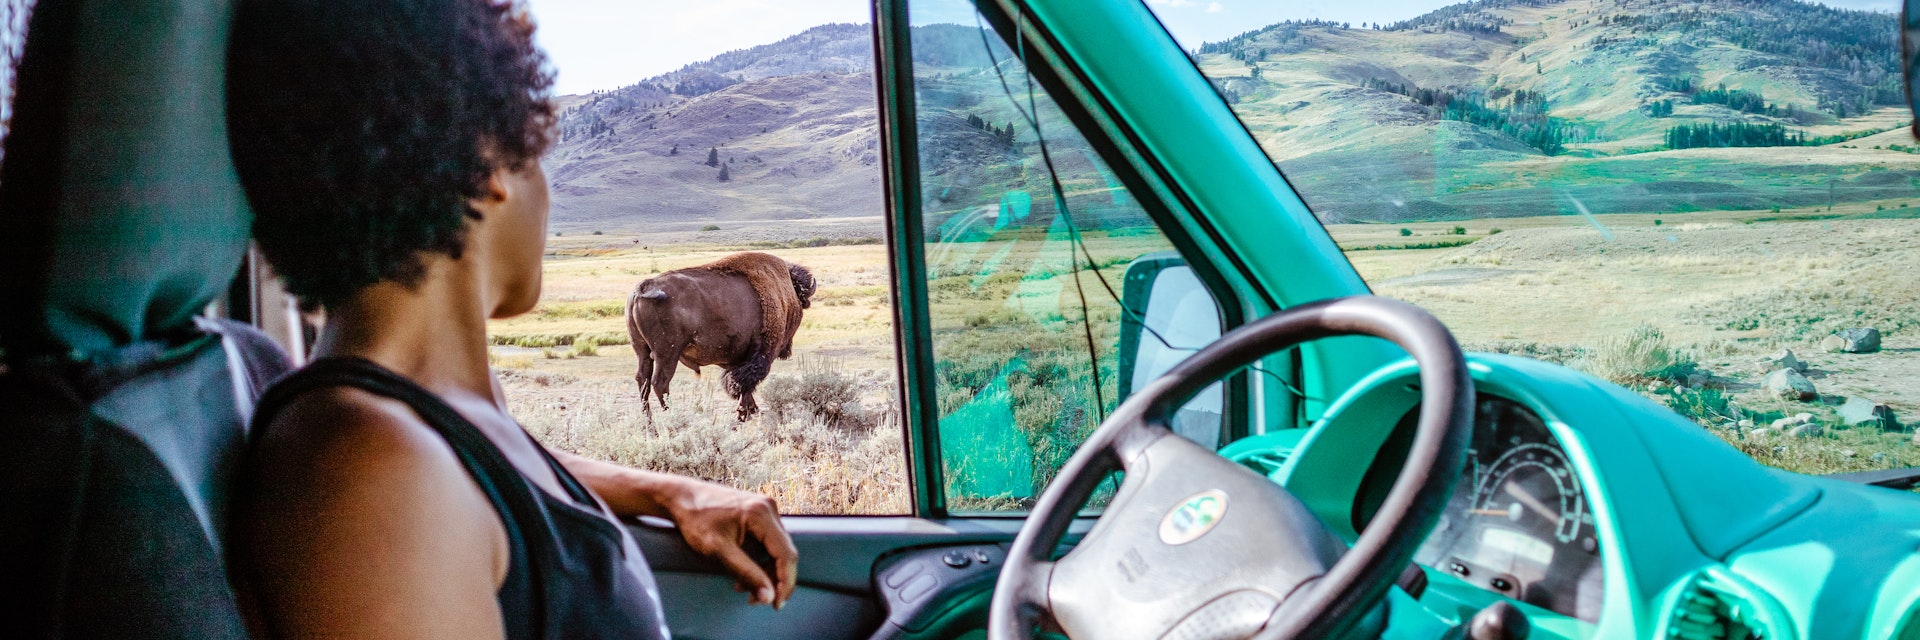 Woman looking out van window at bison in Yellowstone